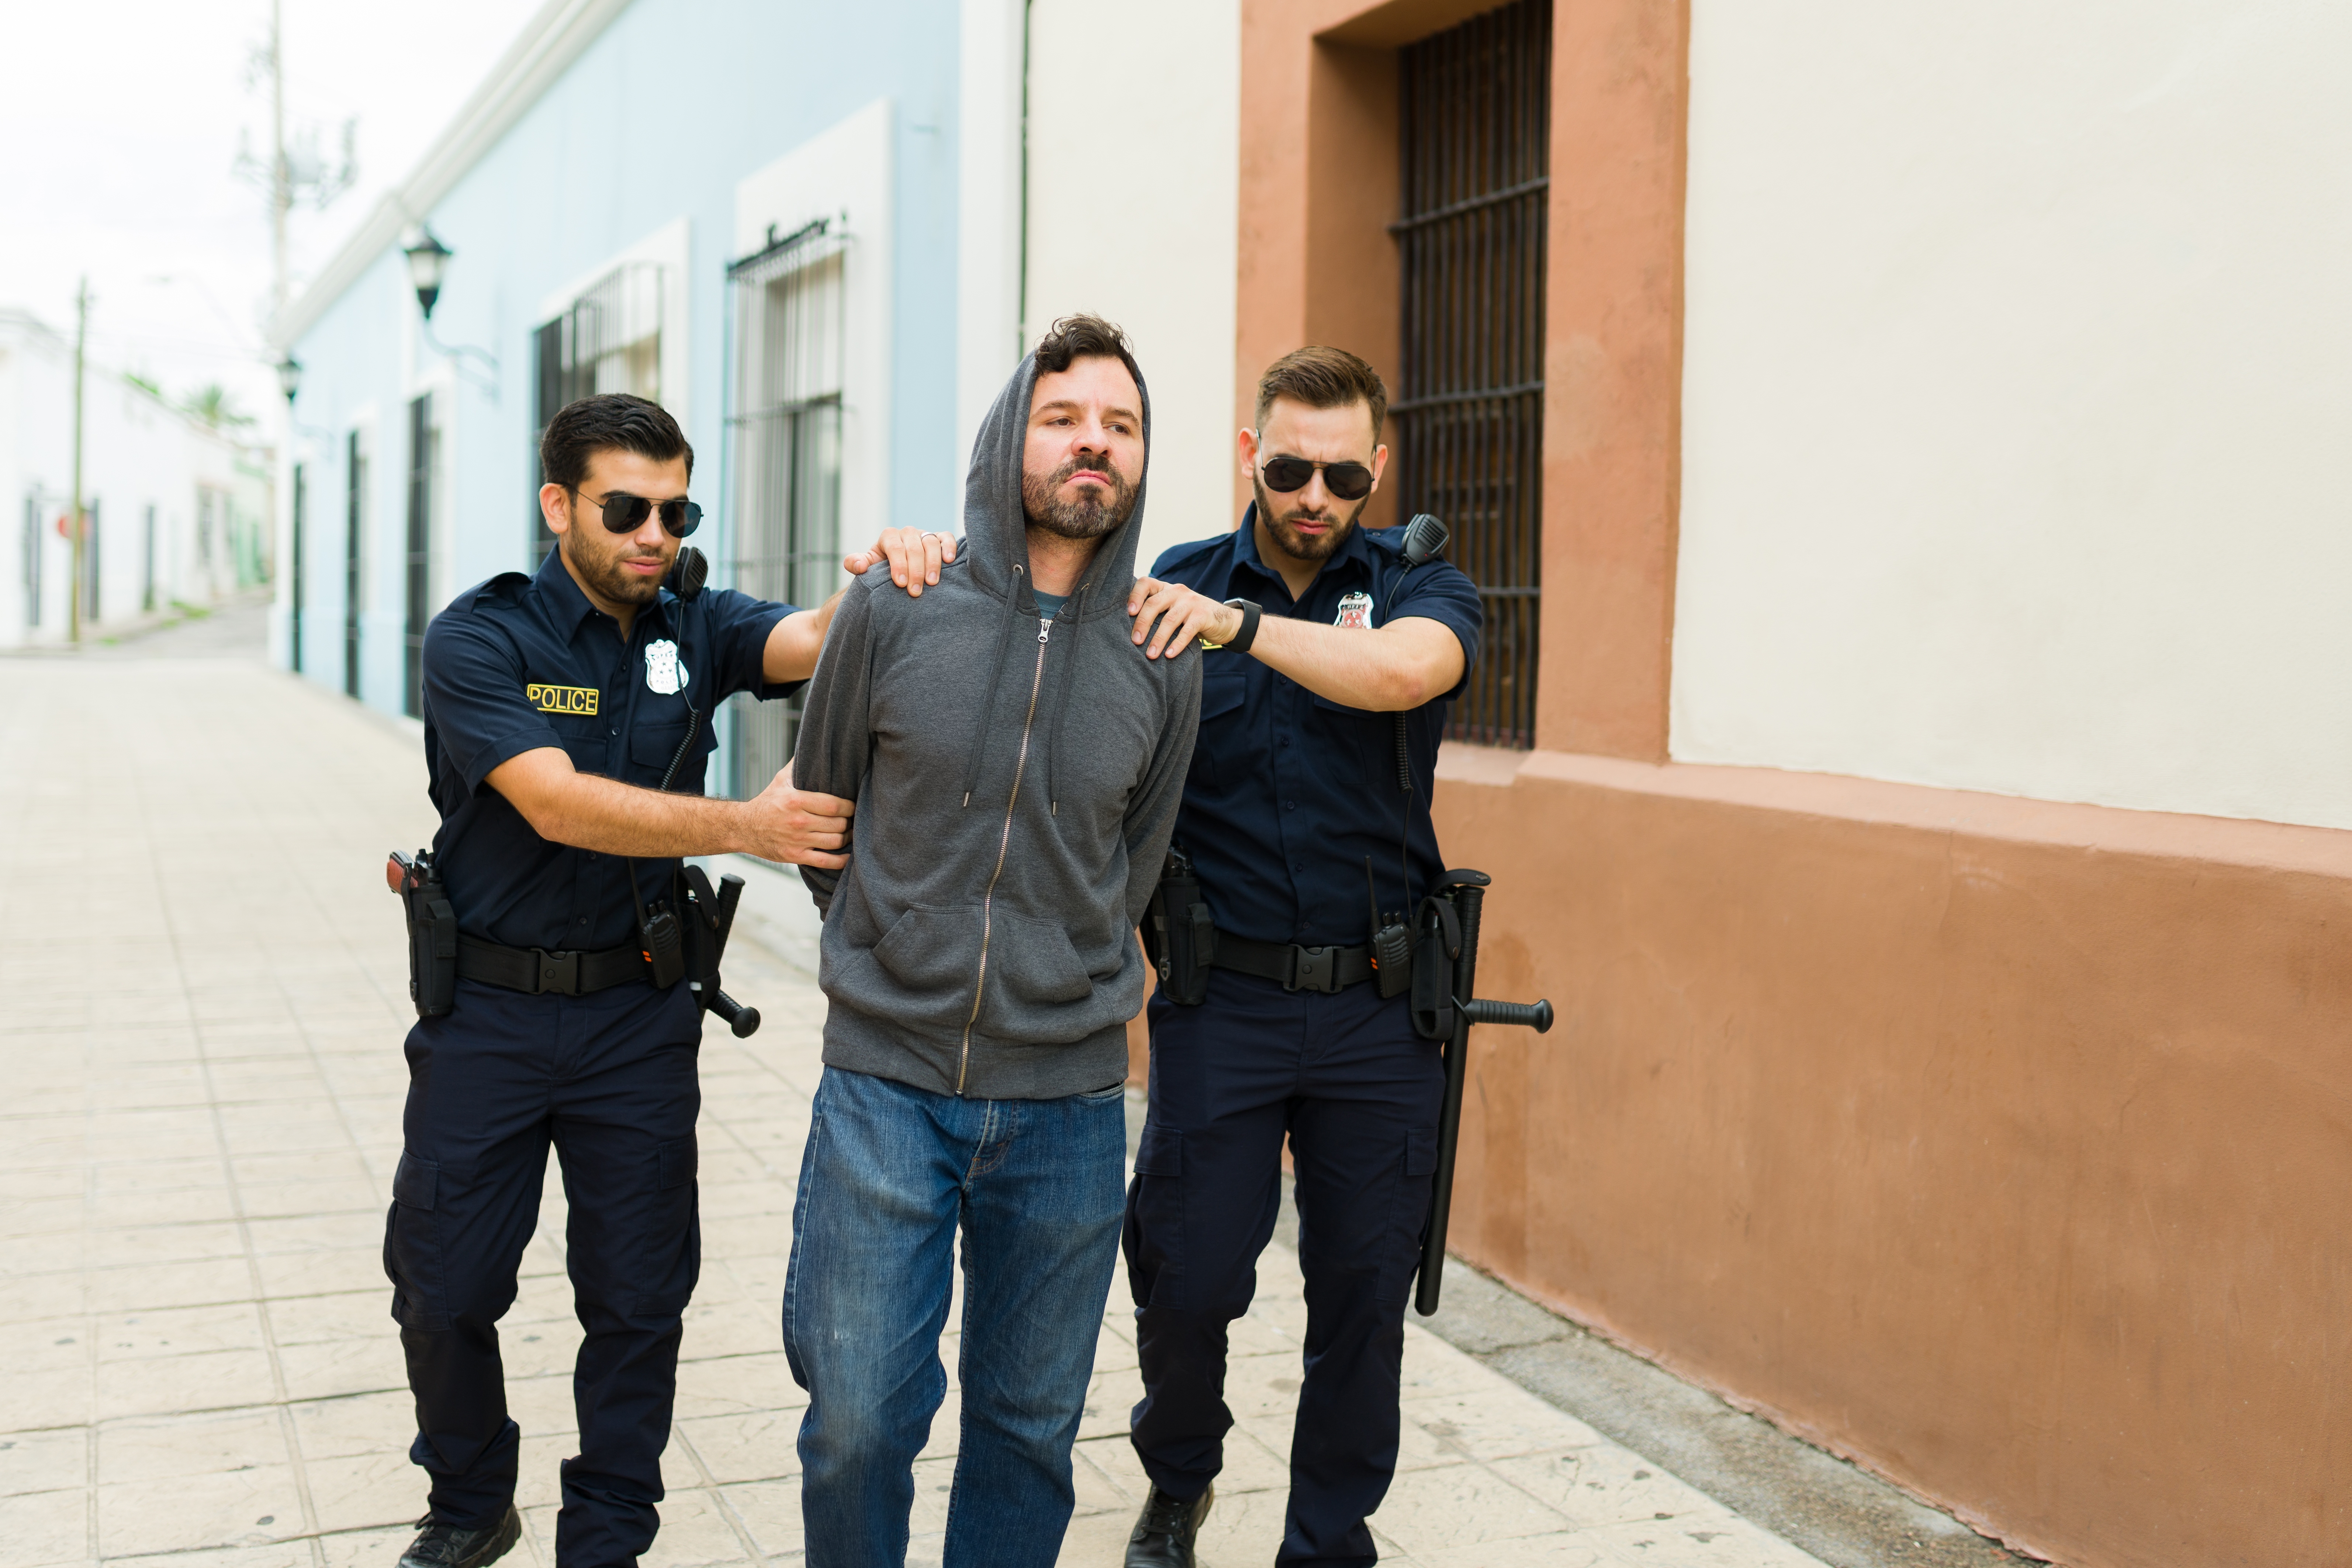 Violent criminal with a hoodie getting arrested by the police | Source: Shutterstock.com